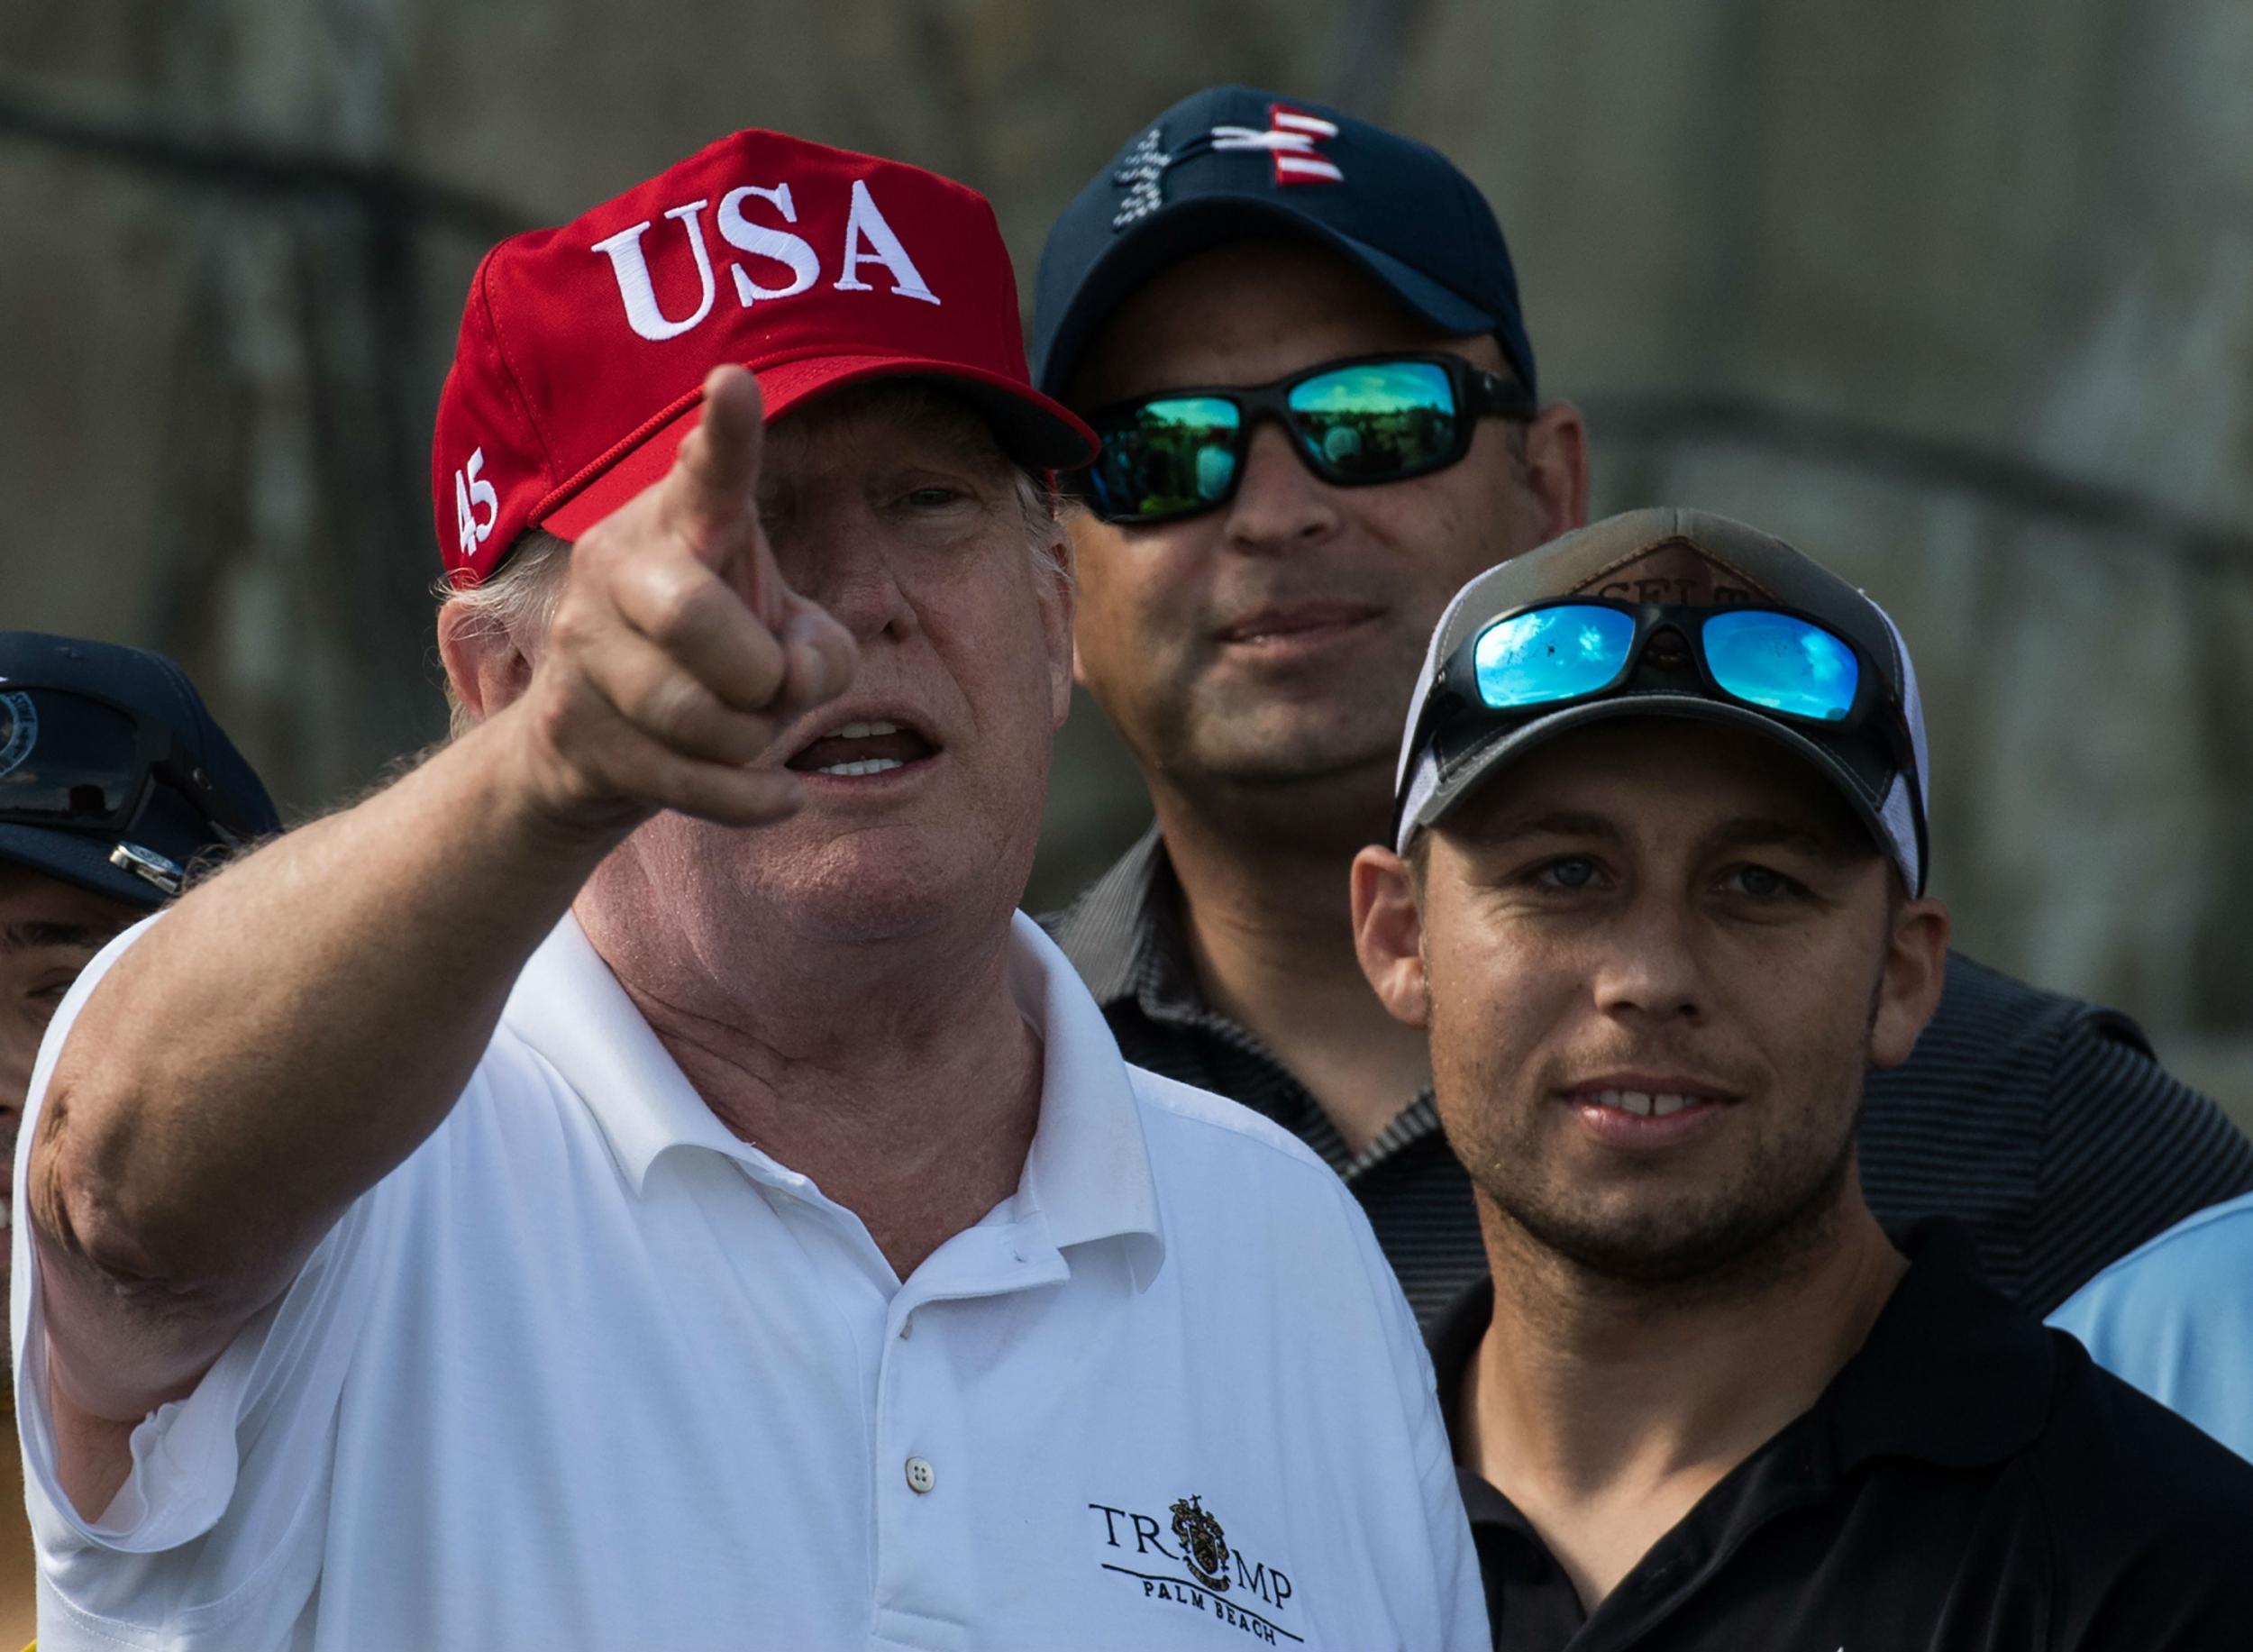 The President is known for his self-proclaimed prowess on the golf course